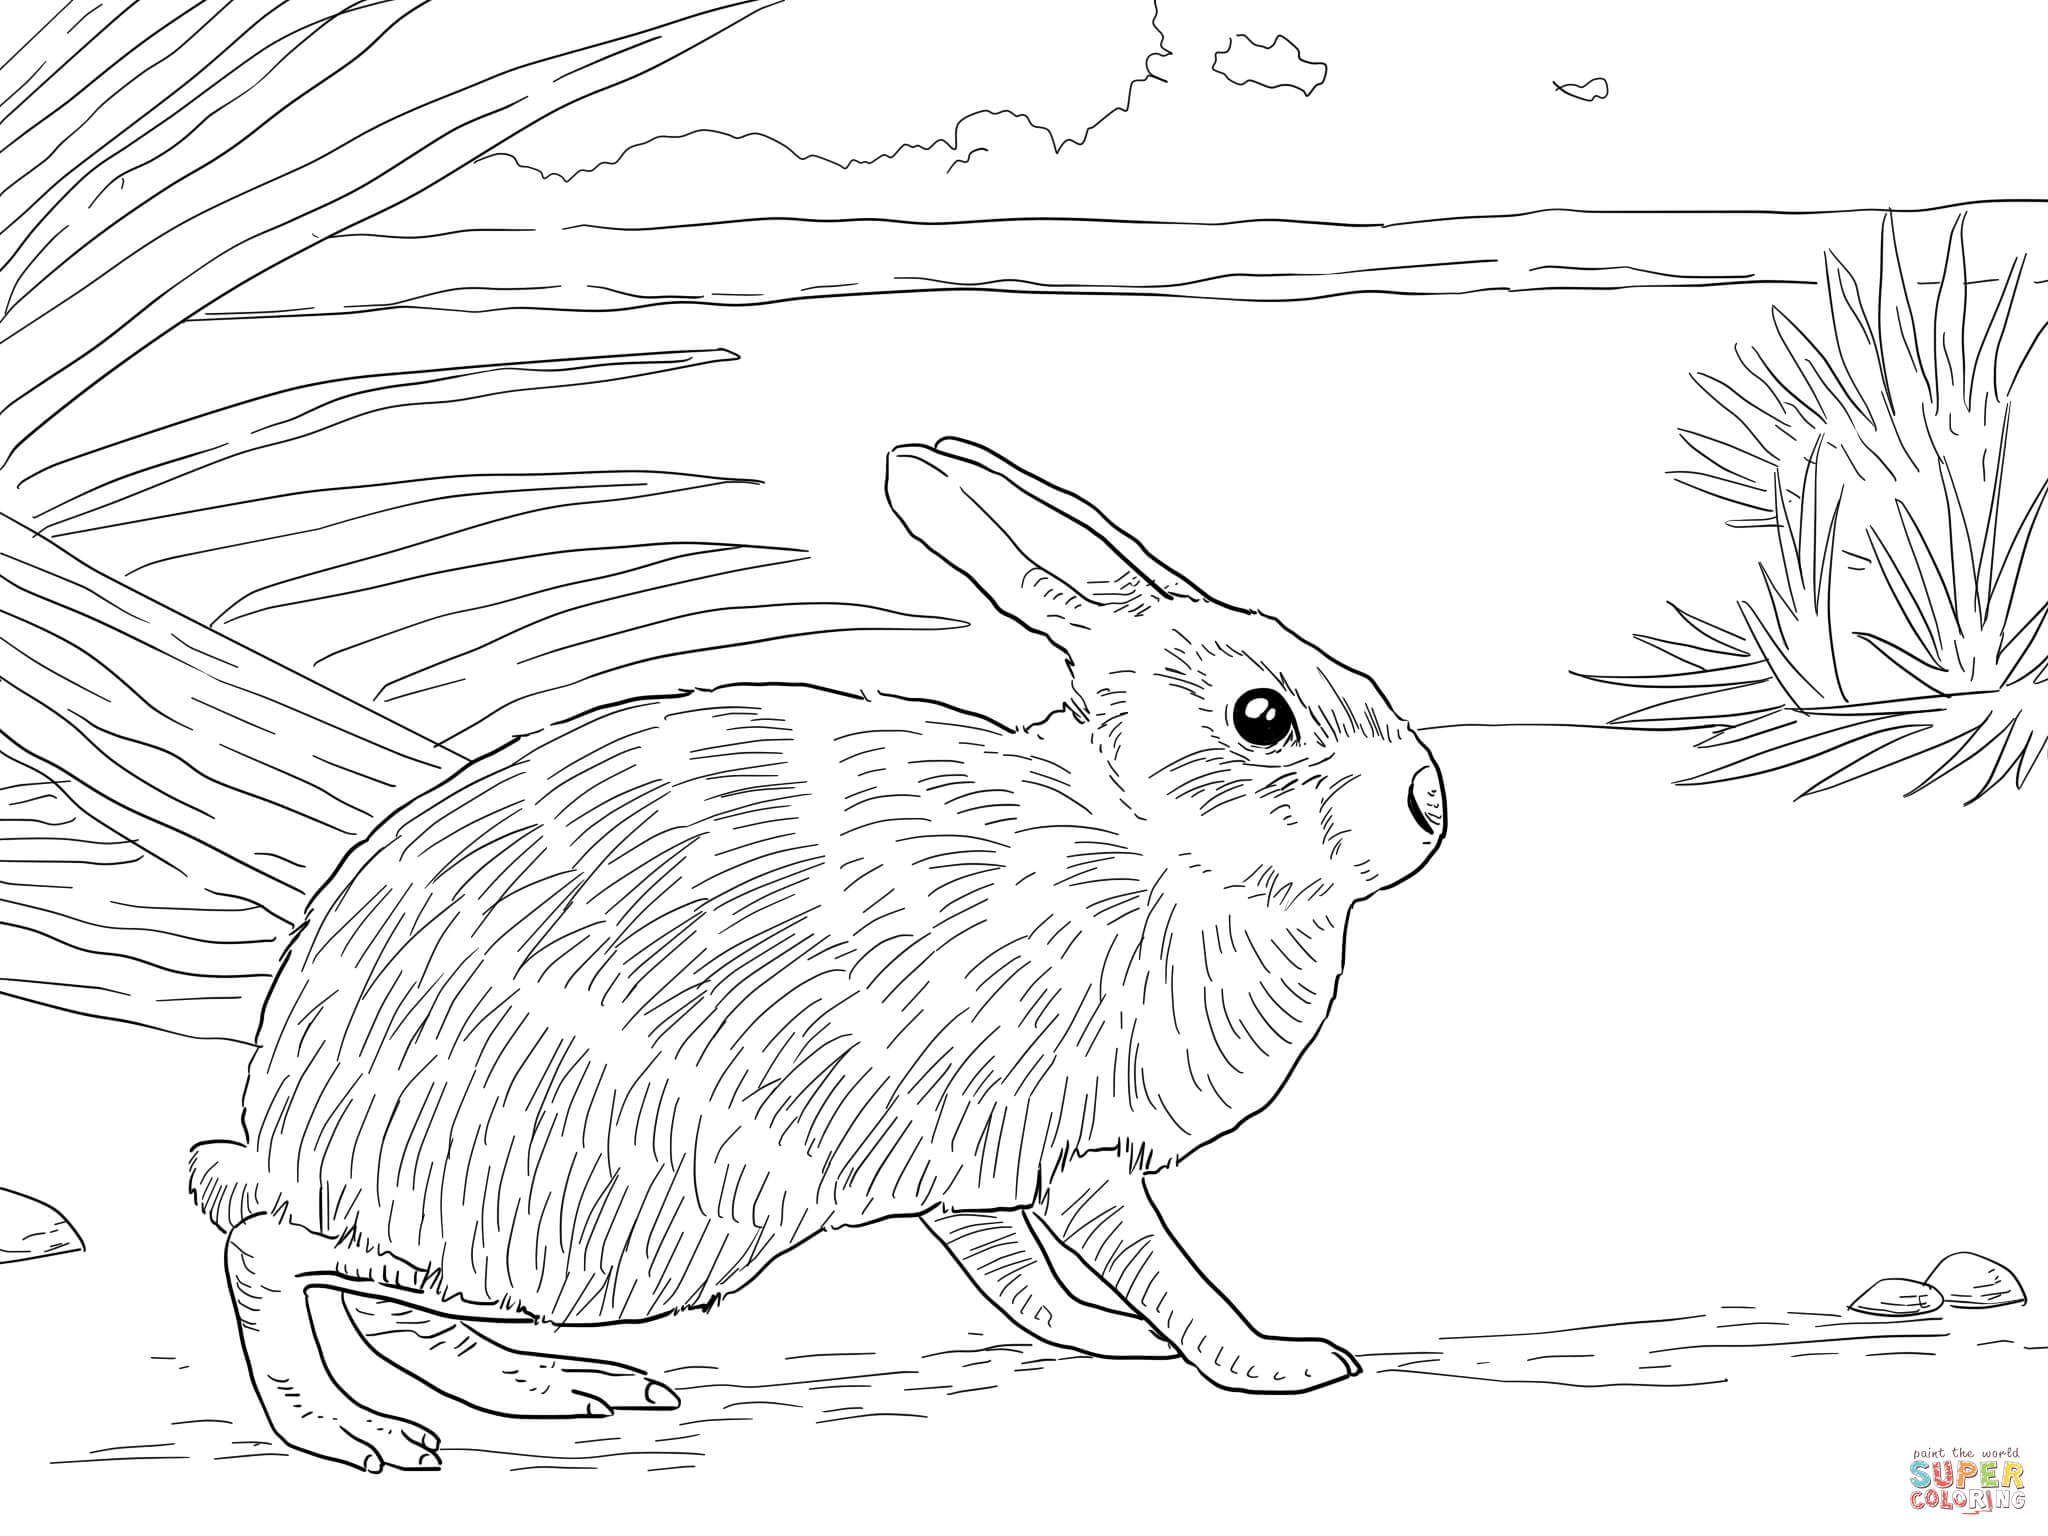 Marsh rabbit coloring page free printable coloring pages